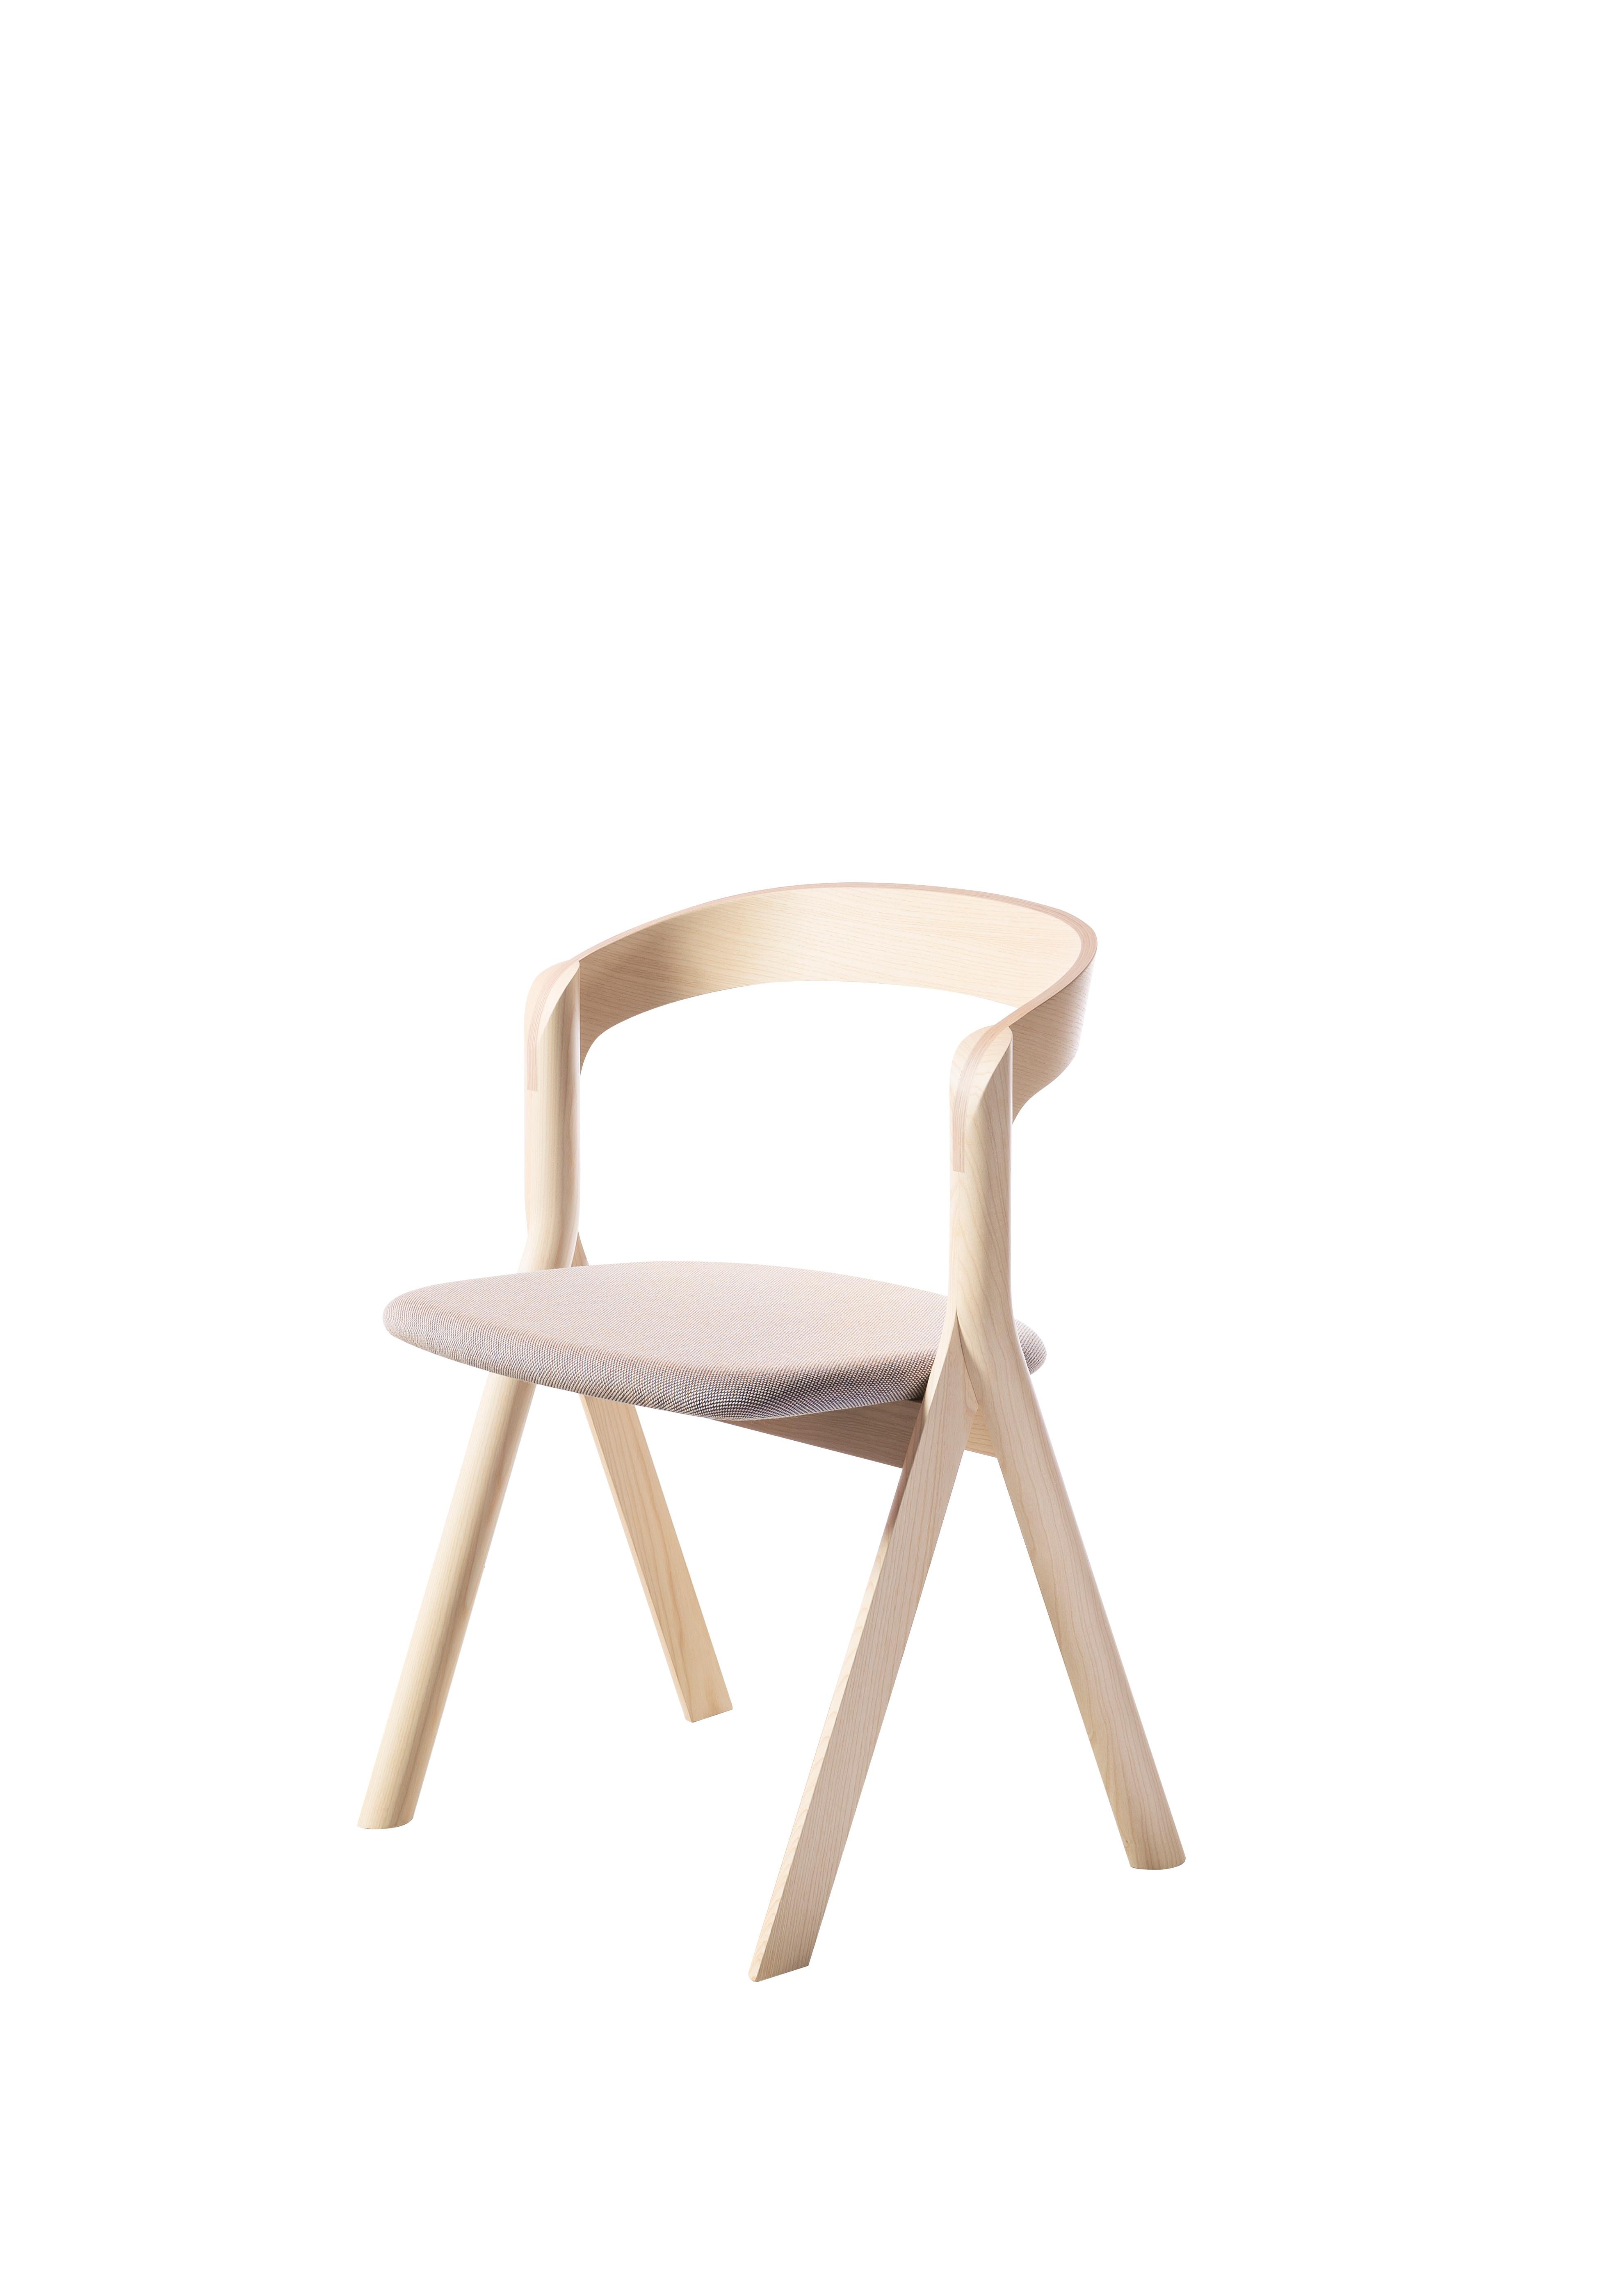 For Sale: Beige (Ash Wood) Diverge Chair in Wood Structure, Dove Gray Cushion, by Skrivo Design